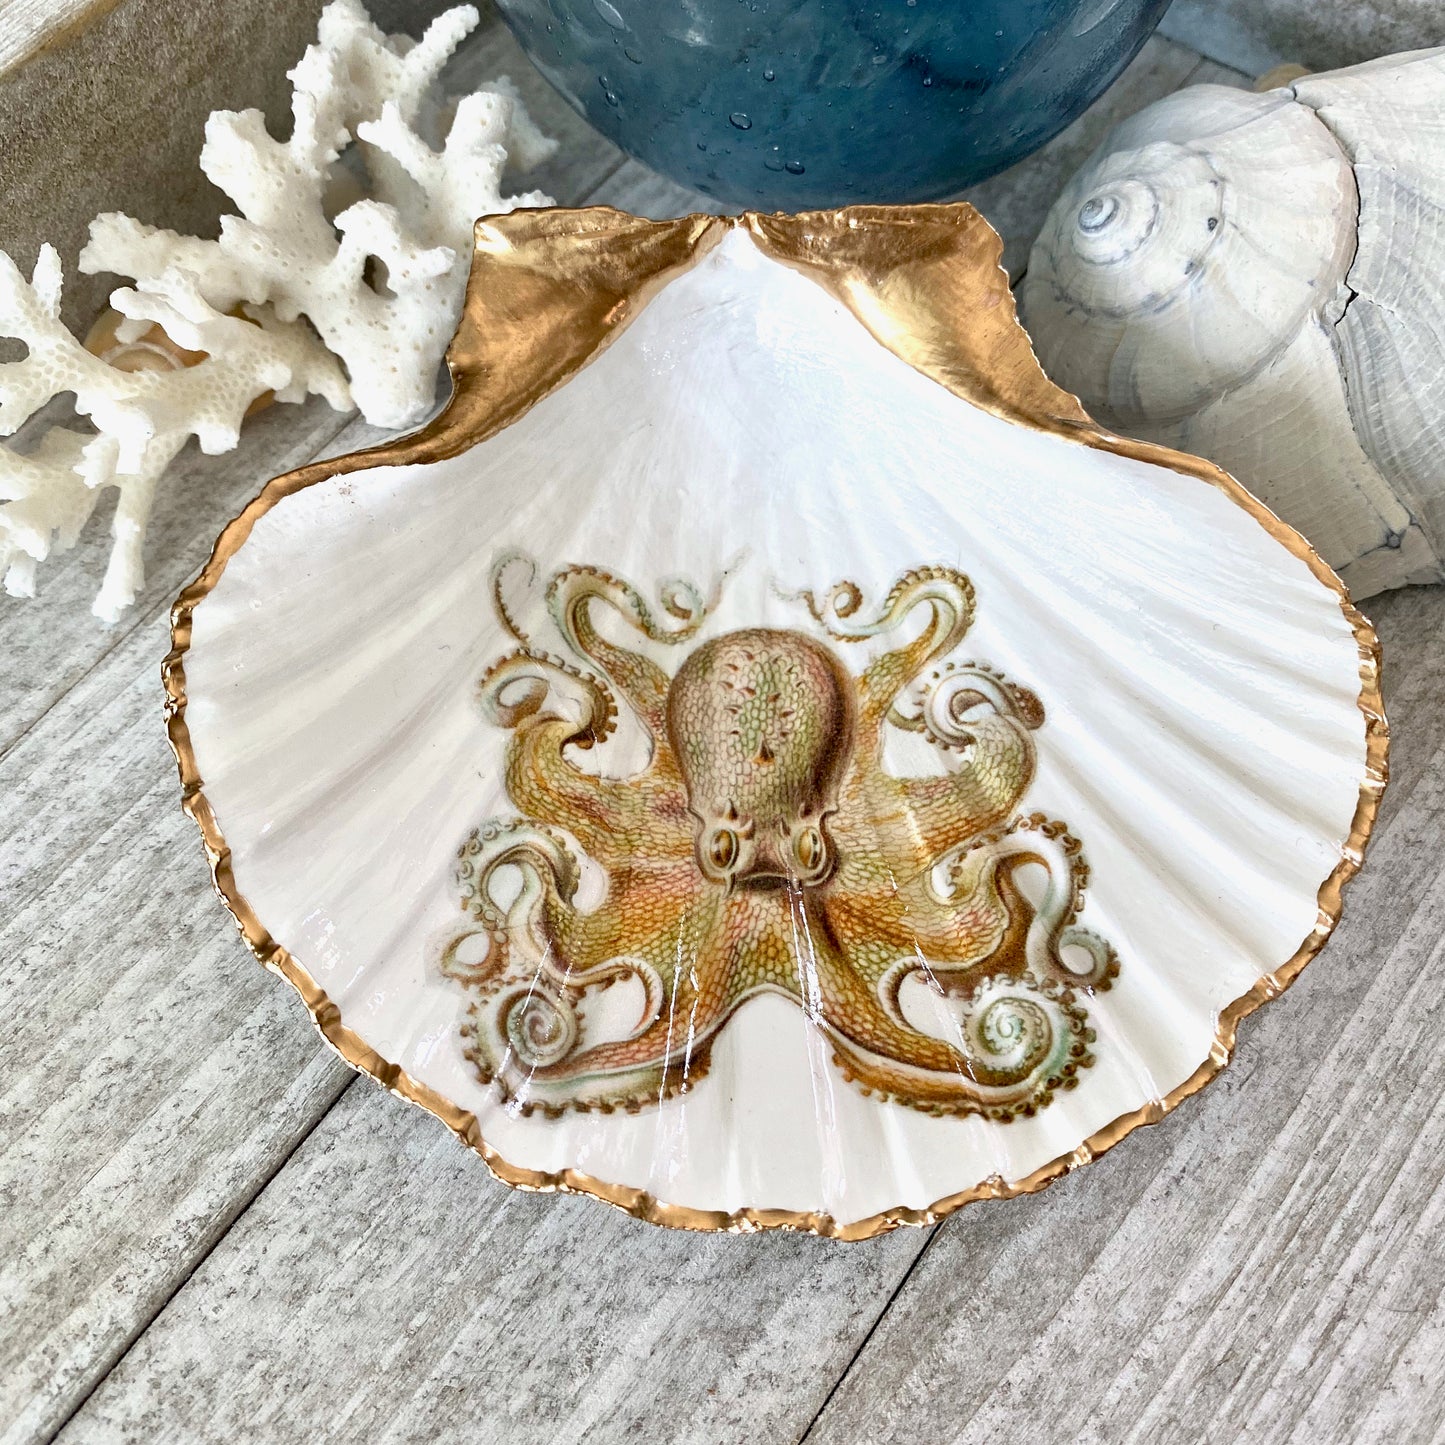 Golden Octopus Scallop Ring Dish